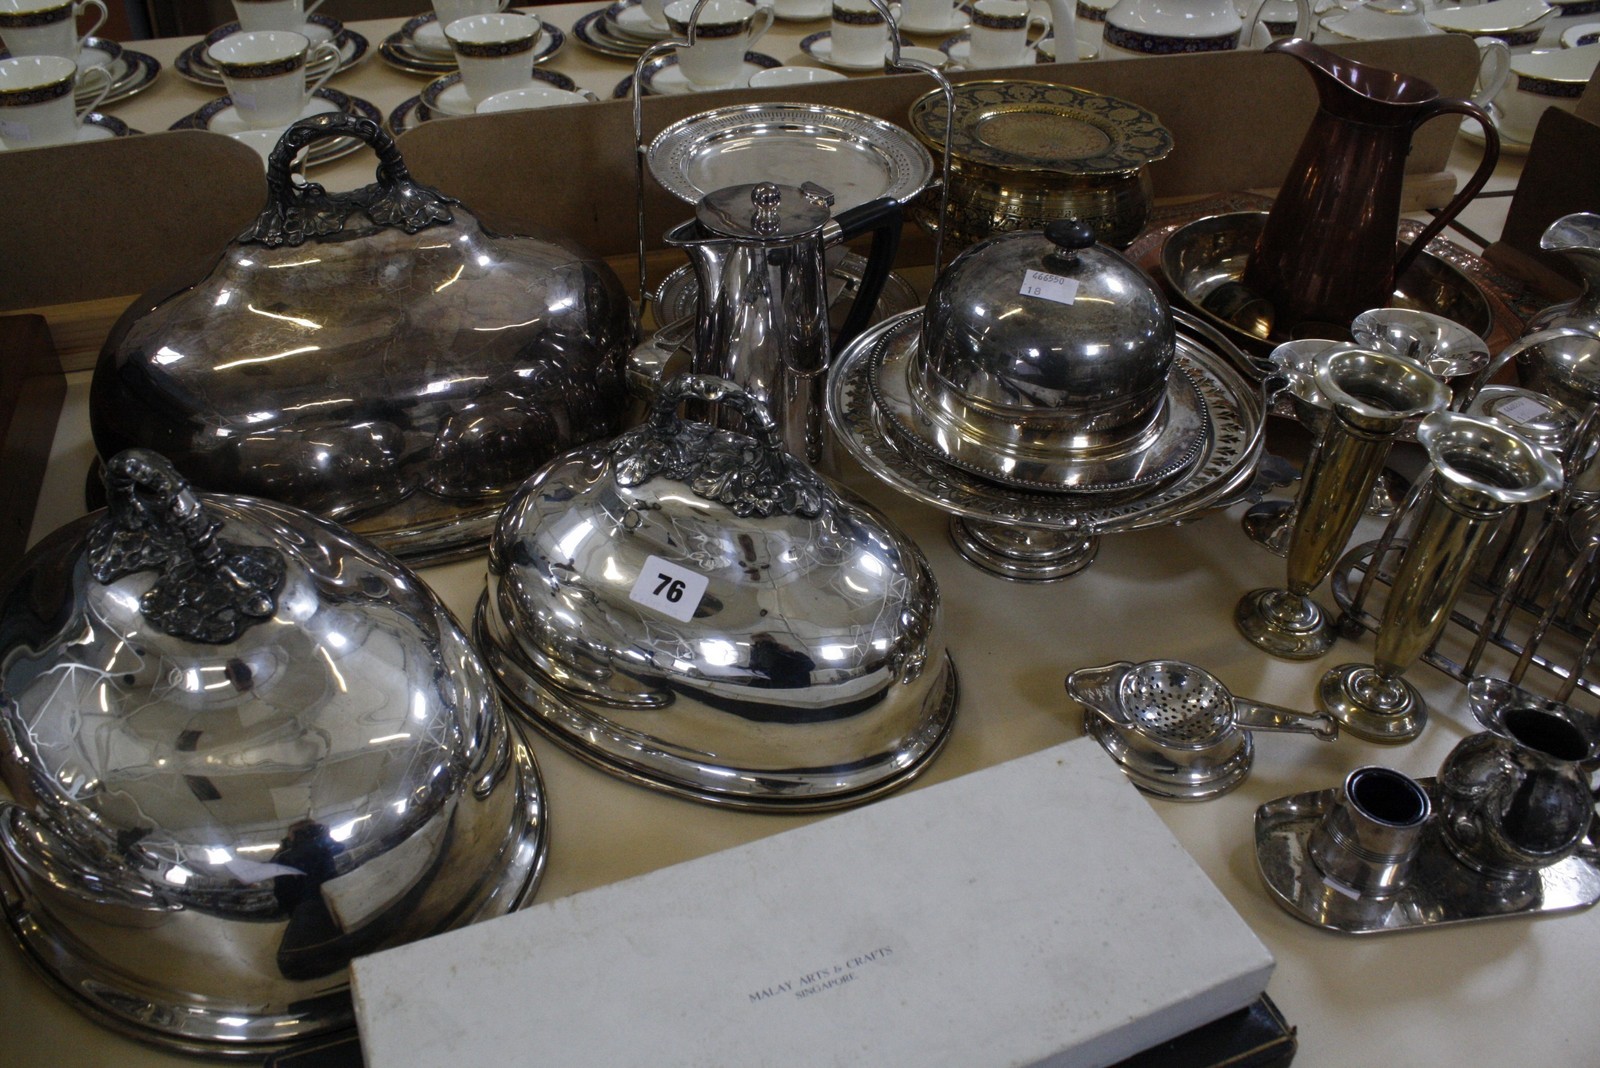 A quantity of silver and silver plate to include silver 'Claret', 'Port' and 'Sherry' labels, silver